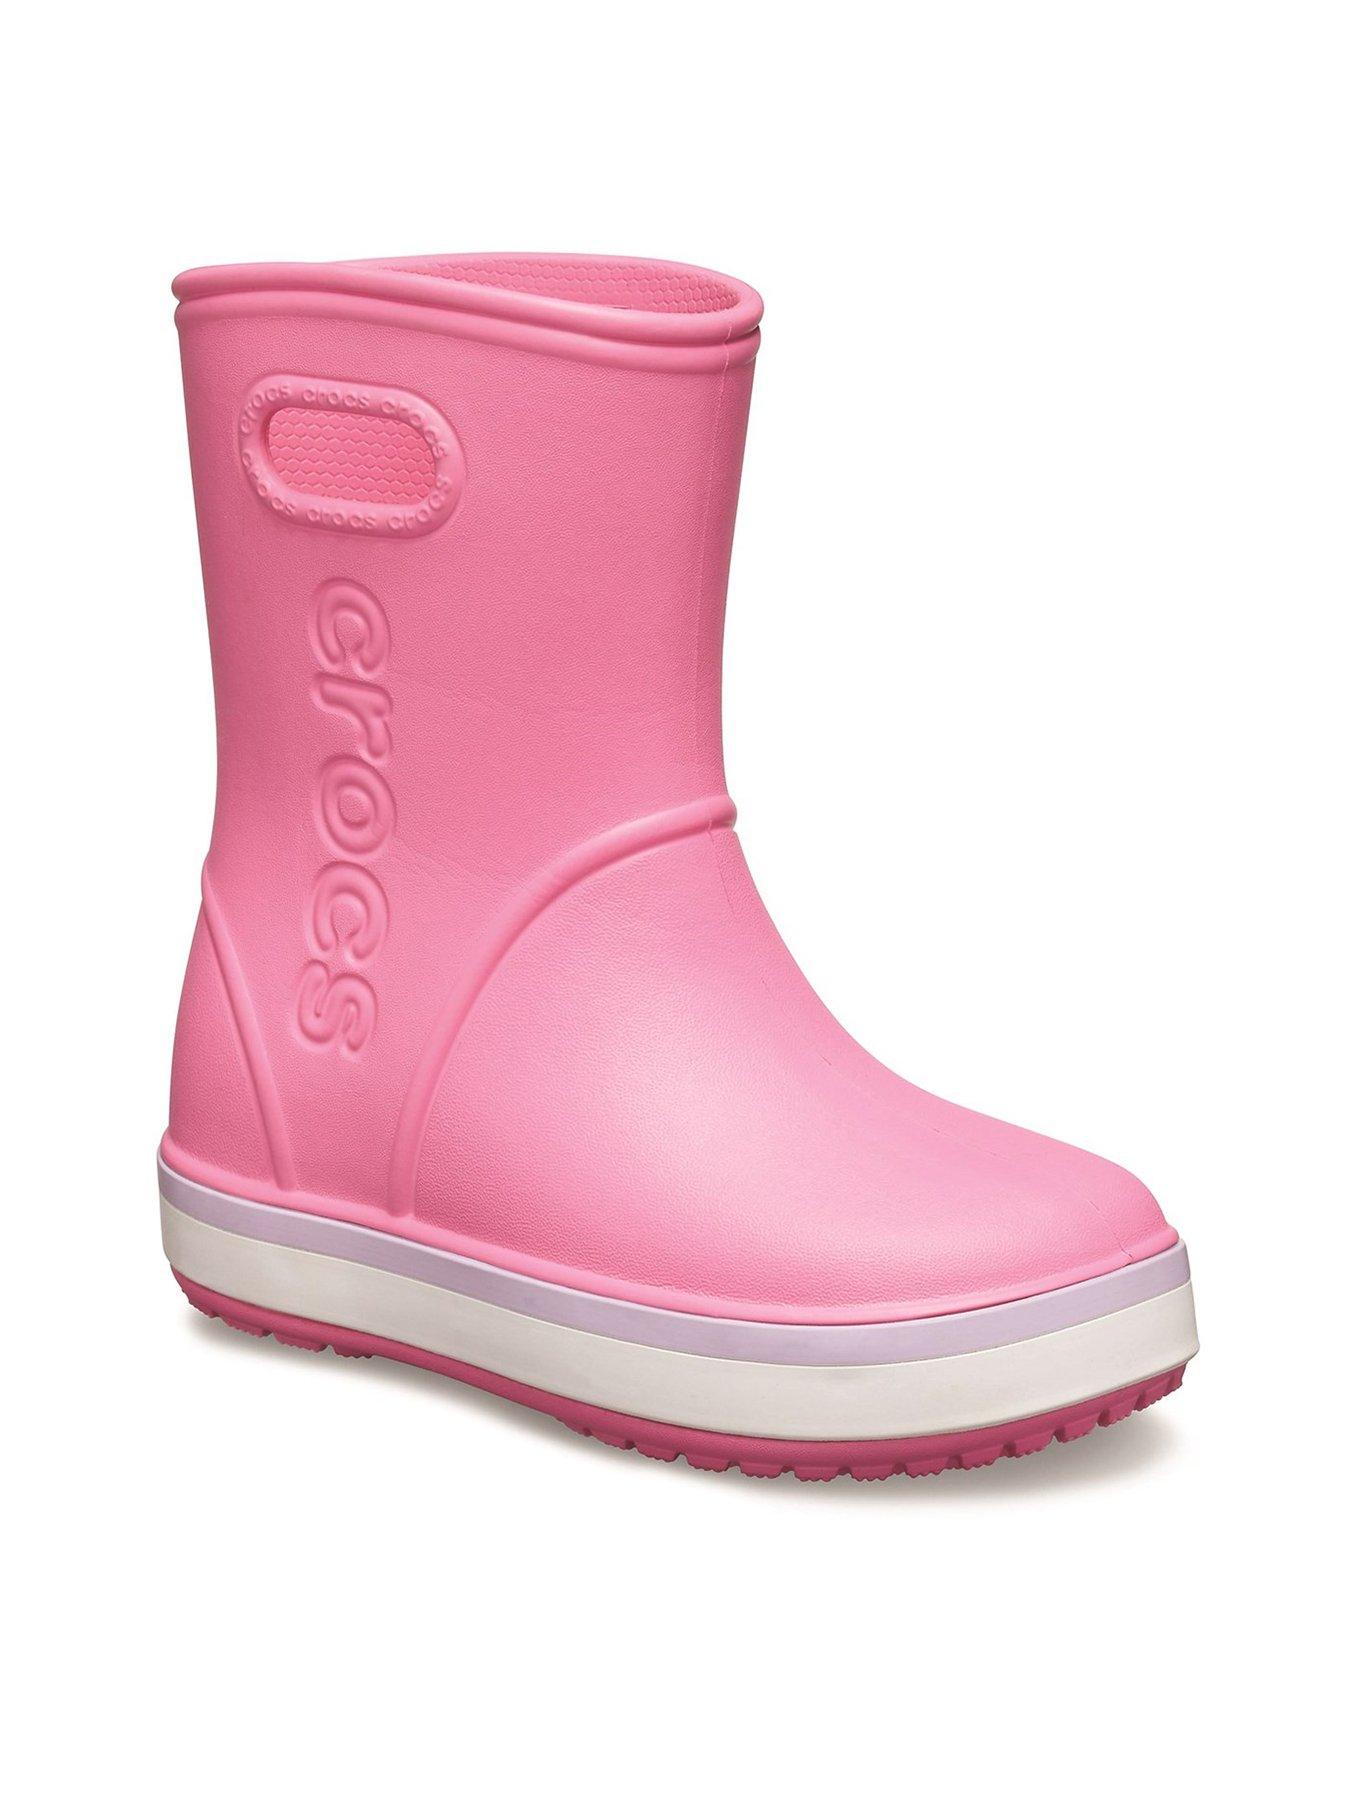 pink baby wellies